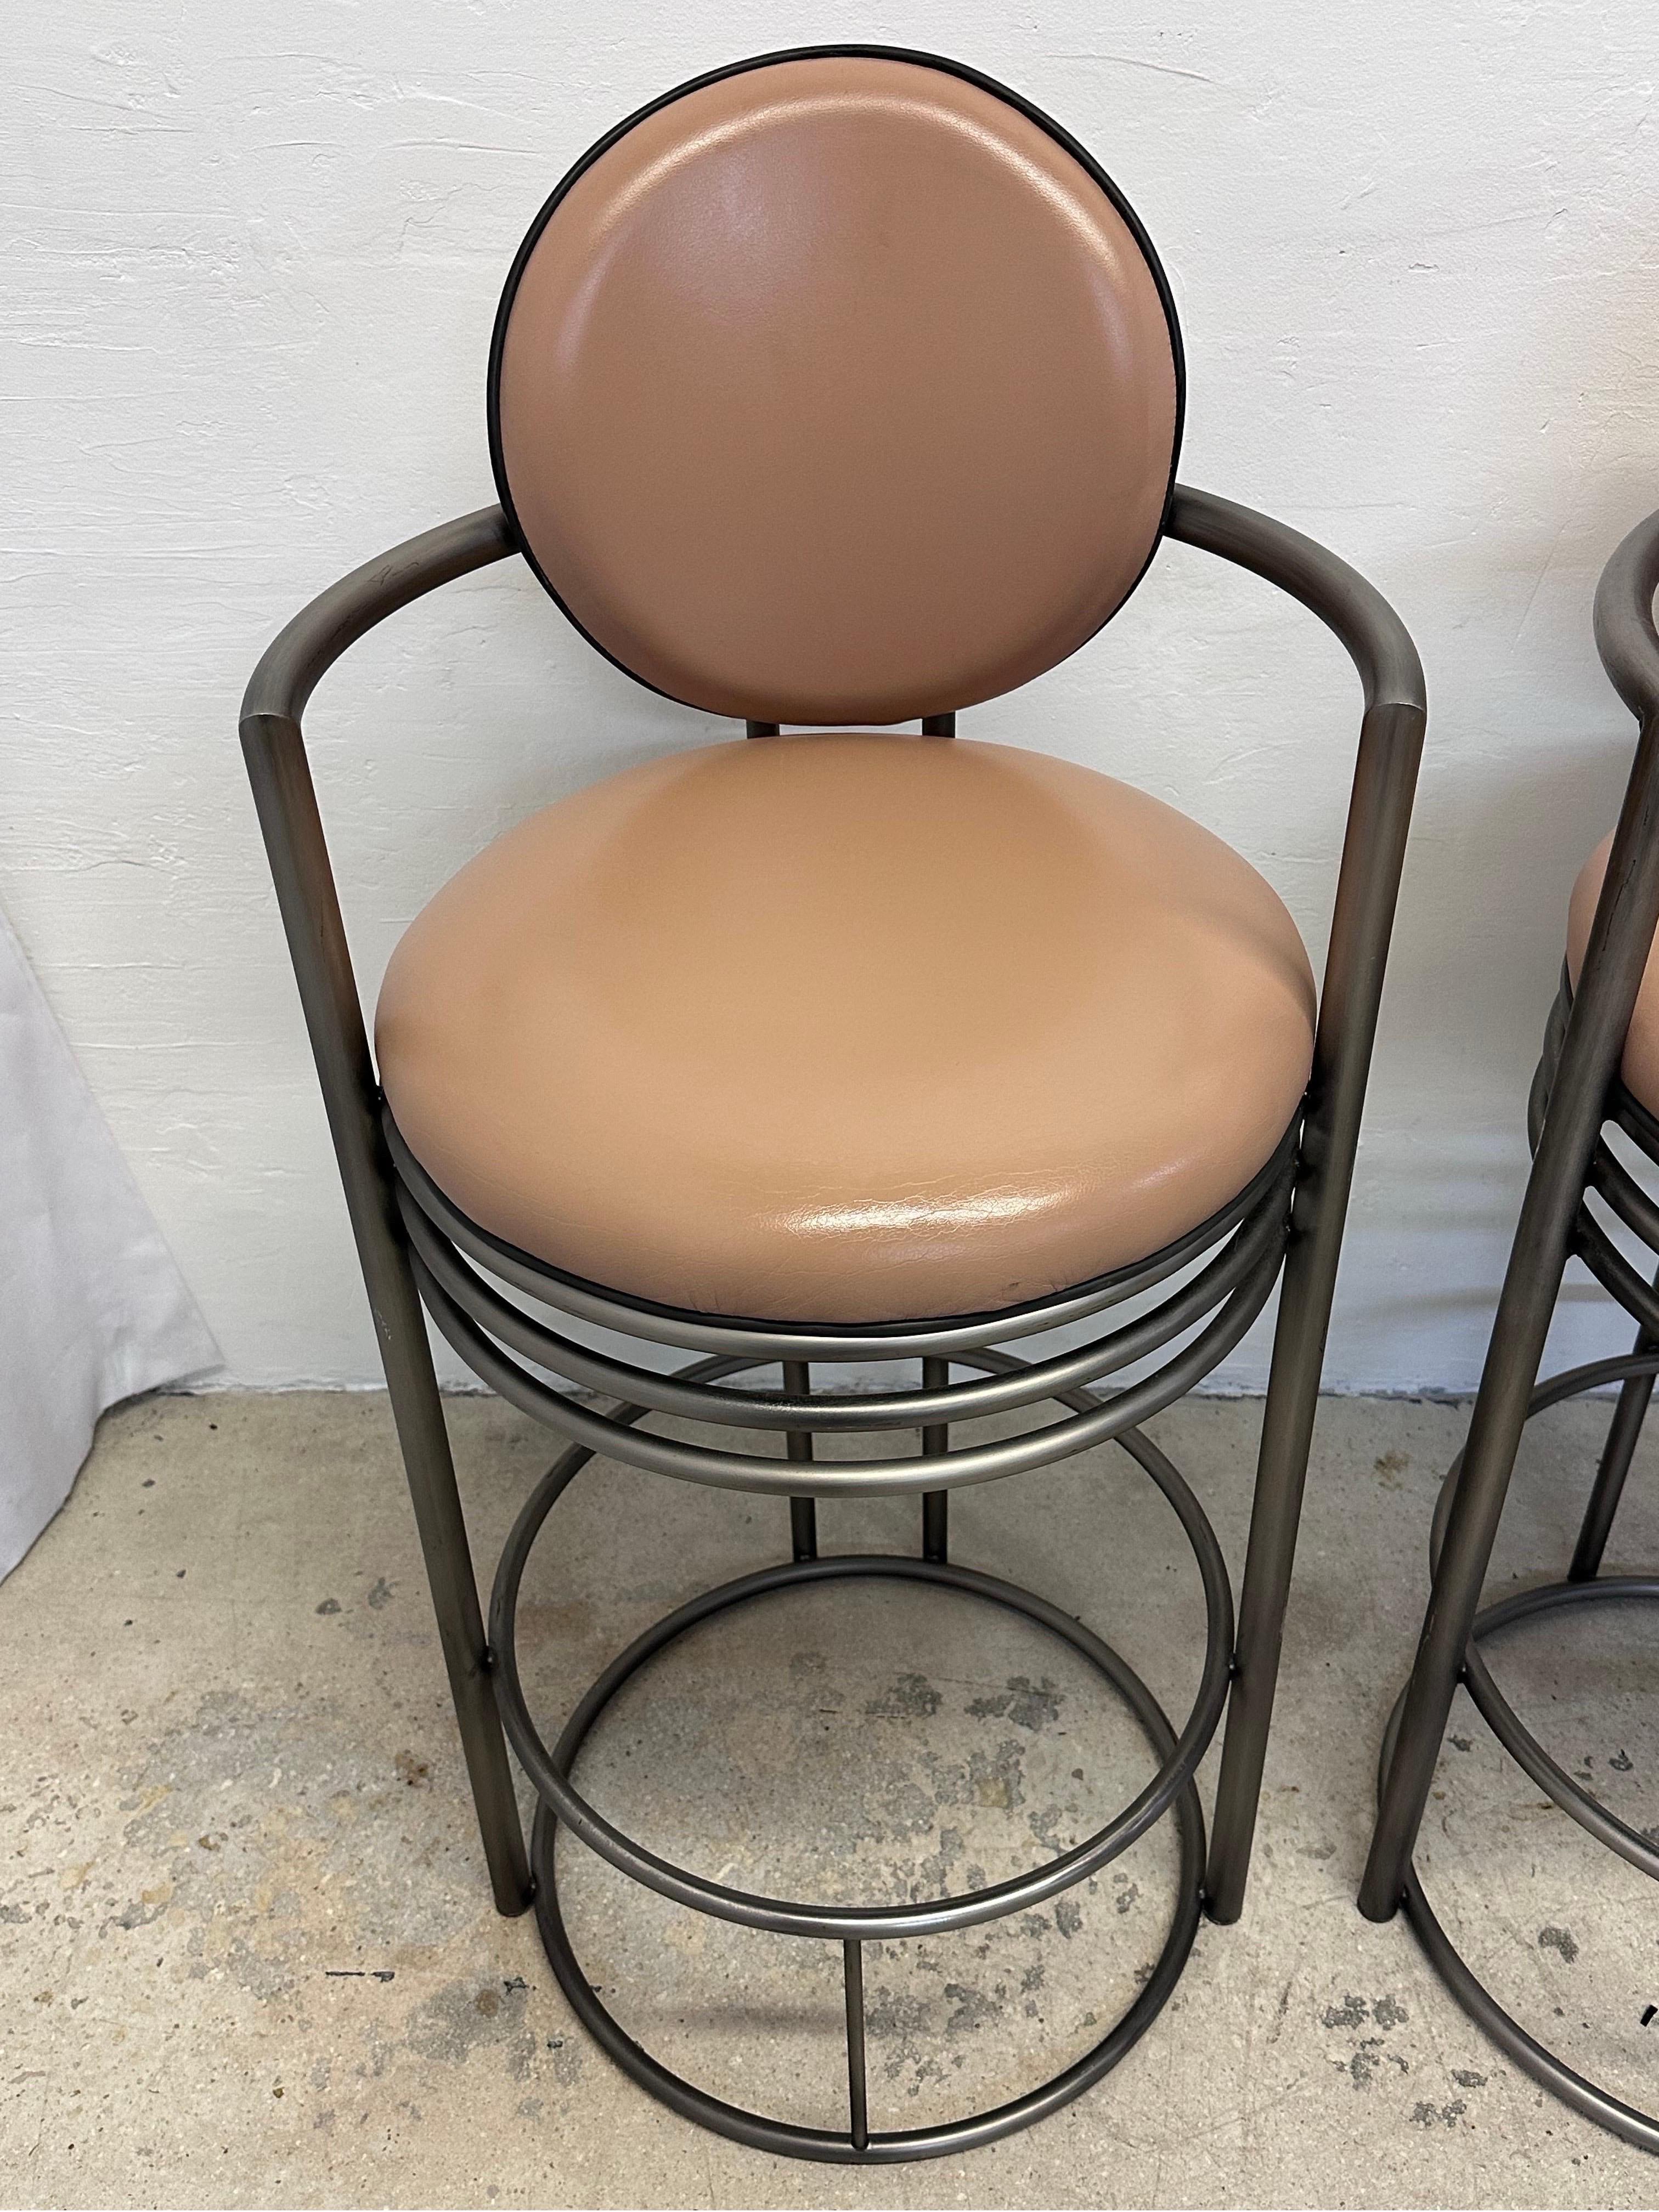 Design Institute America Deco Revival Bar Stools With Arms, 1980s - Set of Three For Sale 2